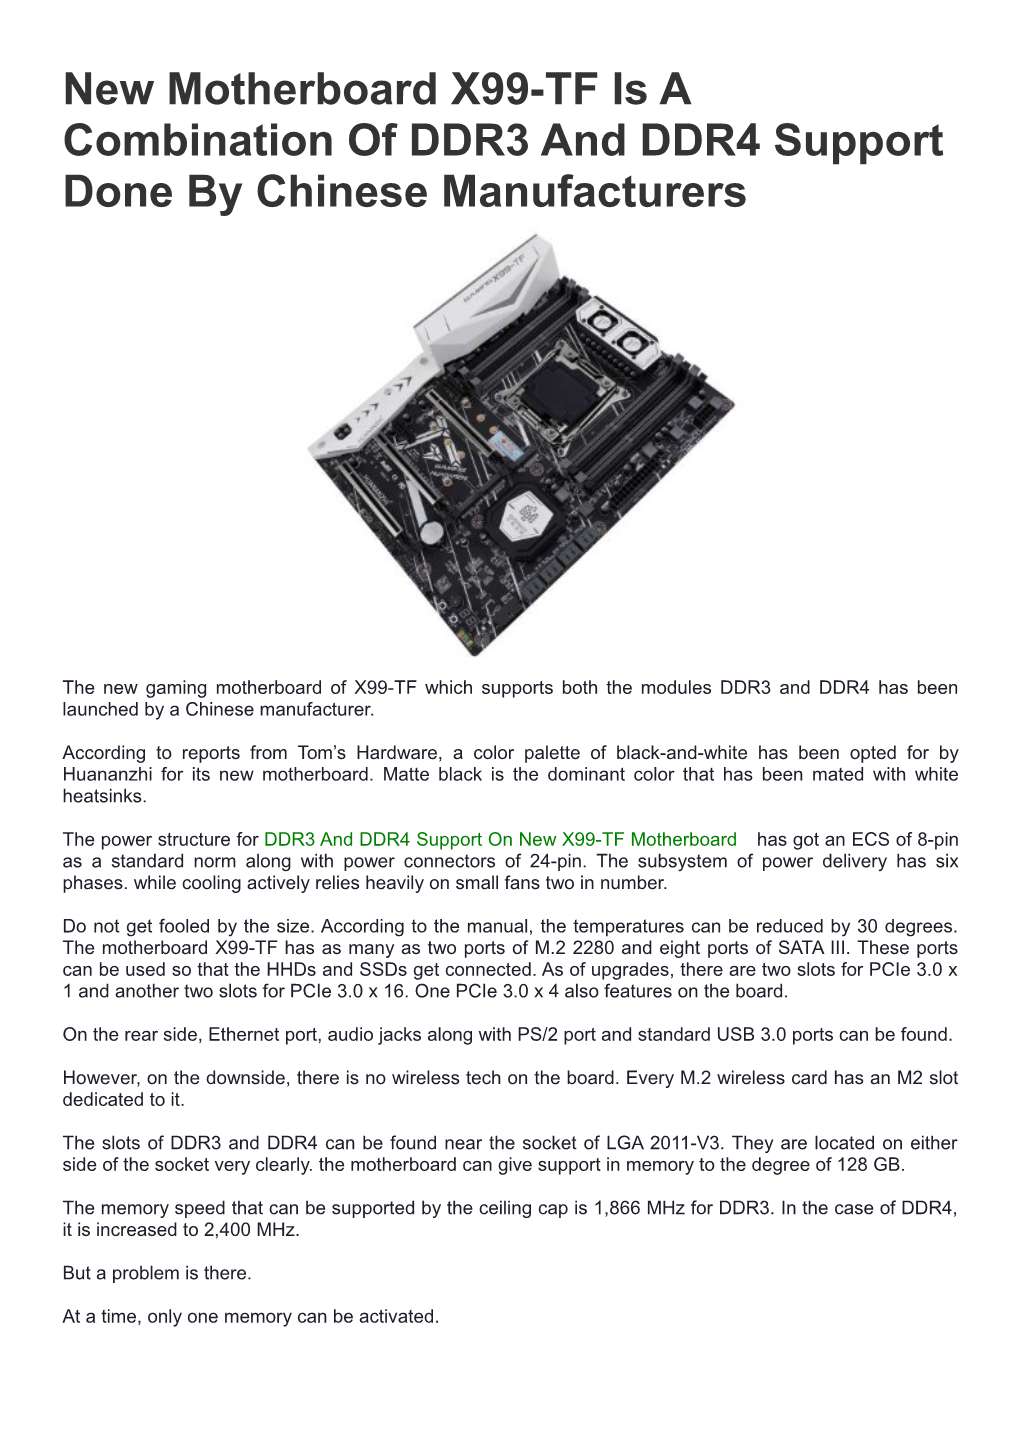 New Motherboard X99-TF Is a Combination of DDR3 and DDR4 Support Done by Chinese Manufacturers